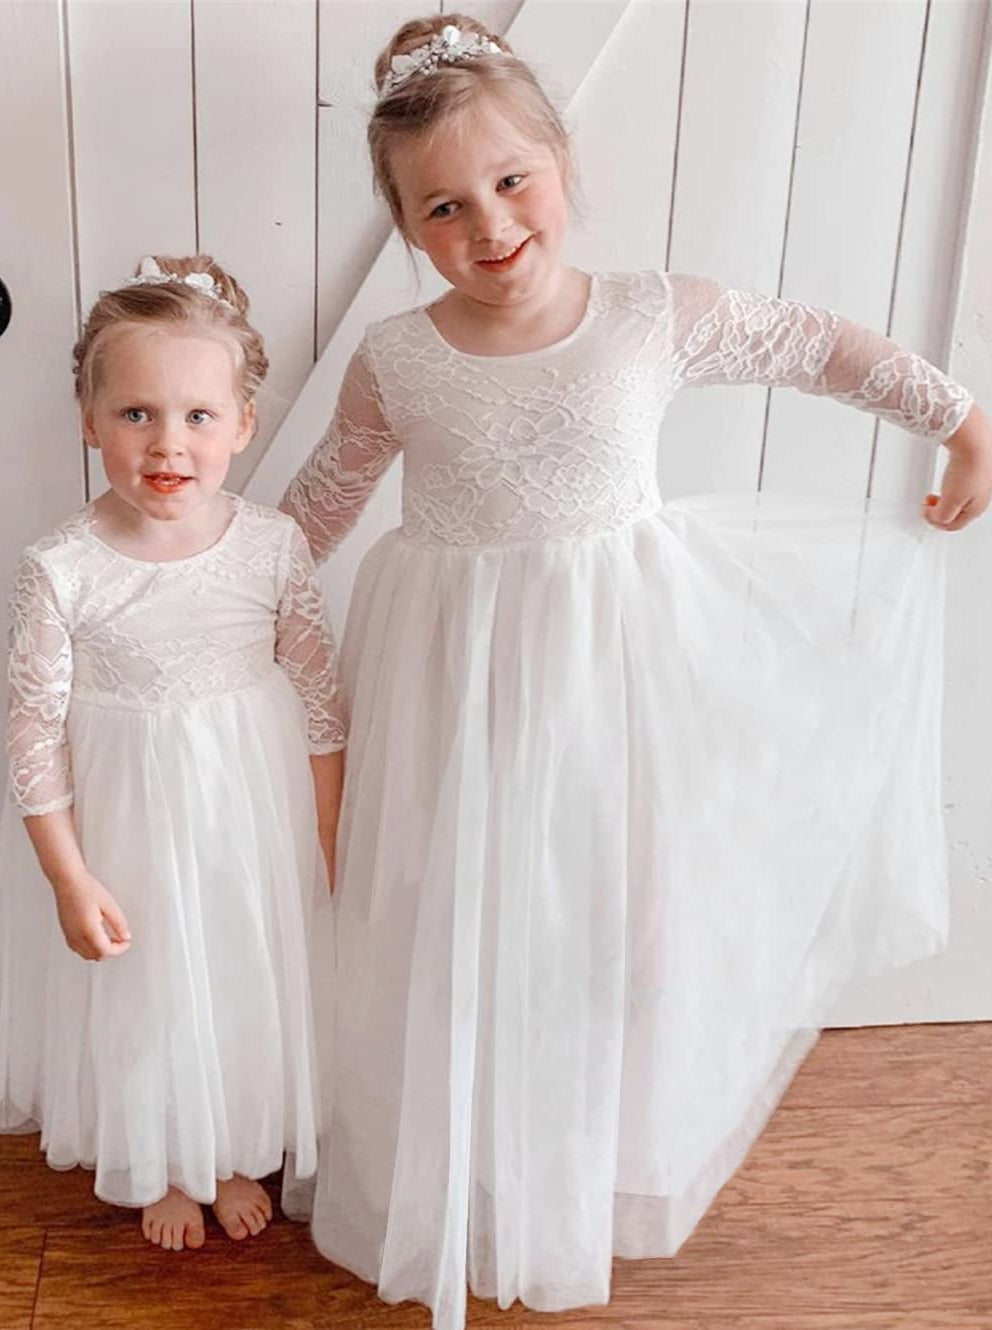 2Bunnies Flower Girl Dress Rose Lace Back A-Line Long Sleeve Straight Tulle Maxi (White) - 2BUNNIES